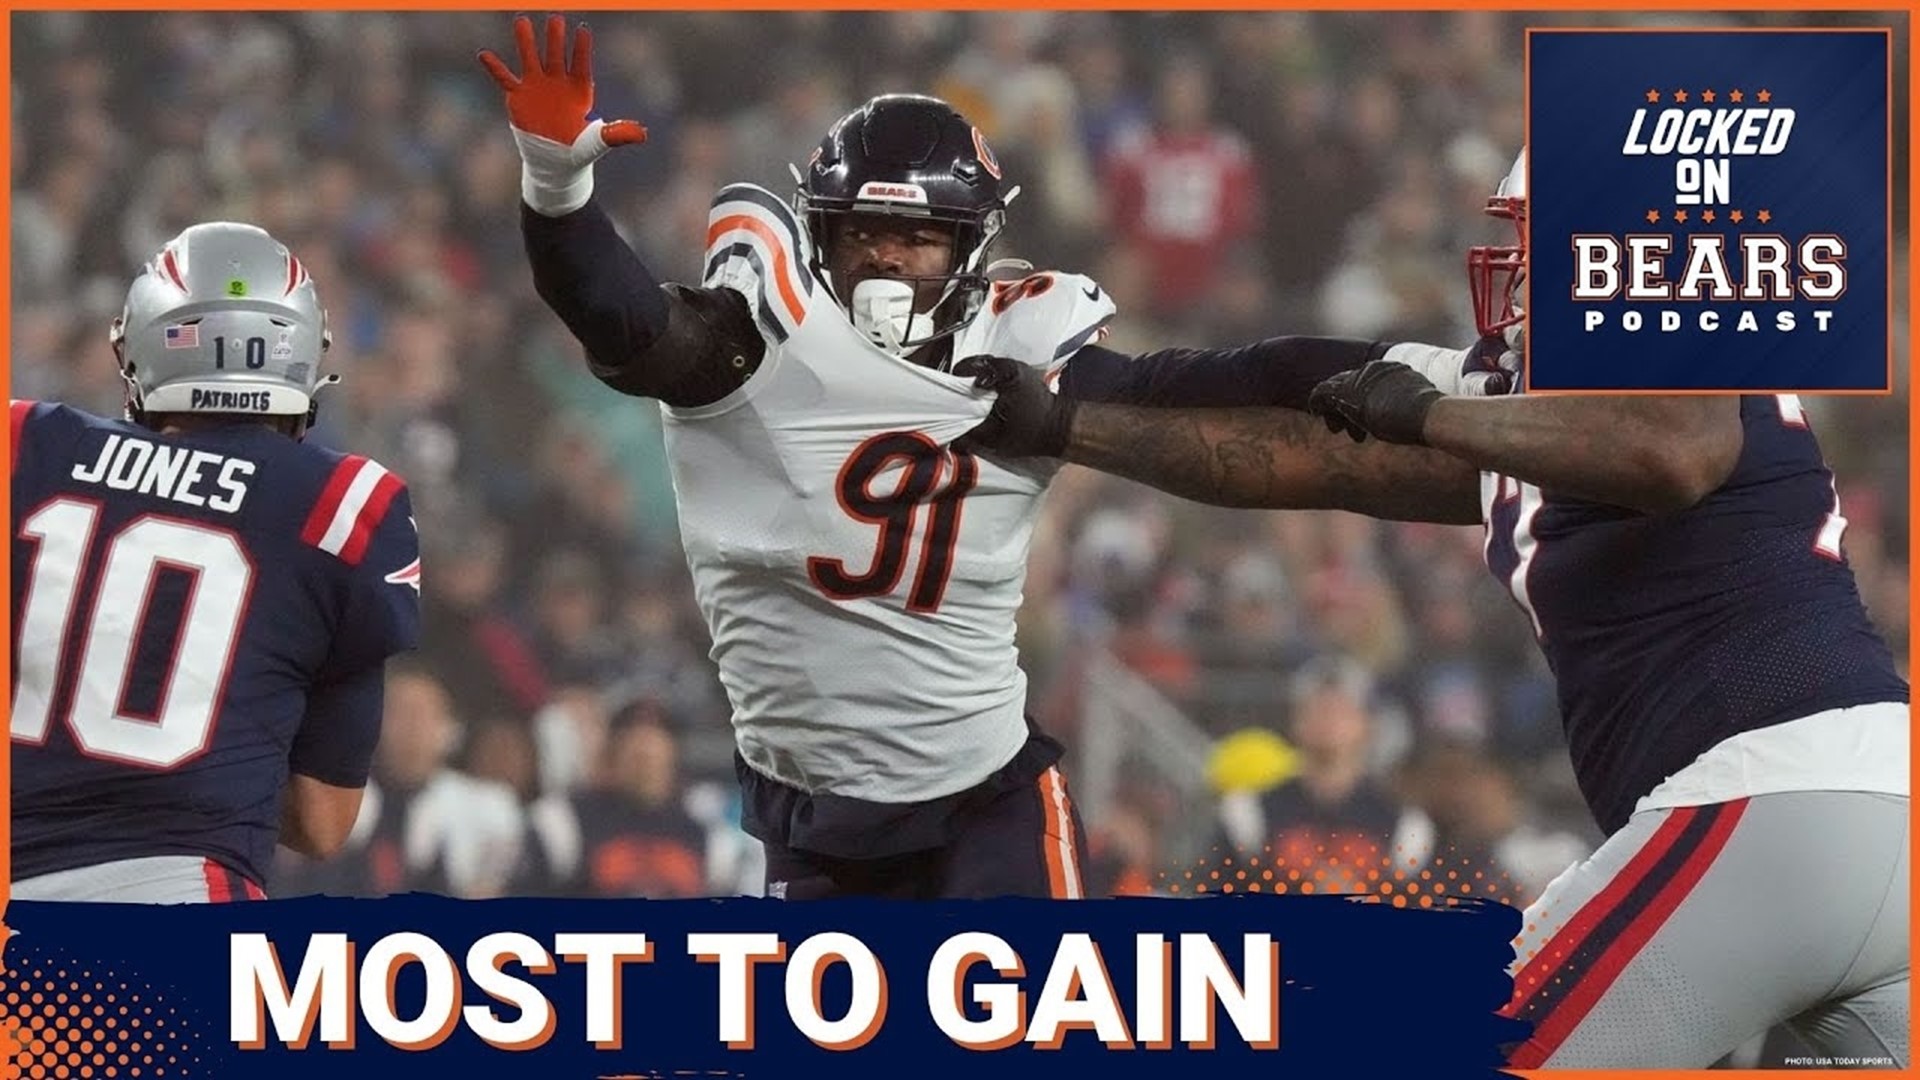 Chicago Bears OTAs and minicamp are a great opportunity for players to grow and step up into bigger roles on the team.